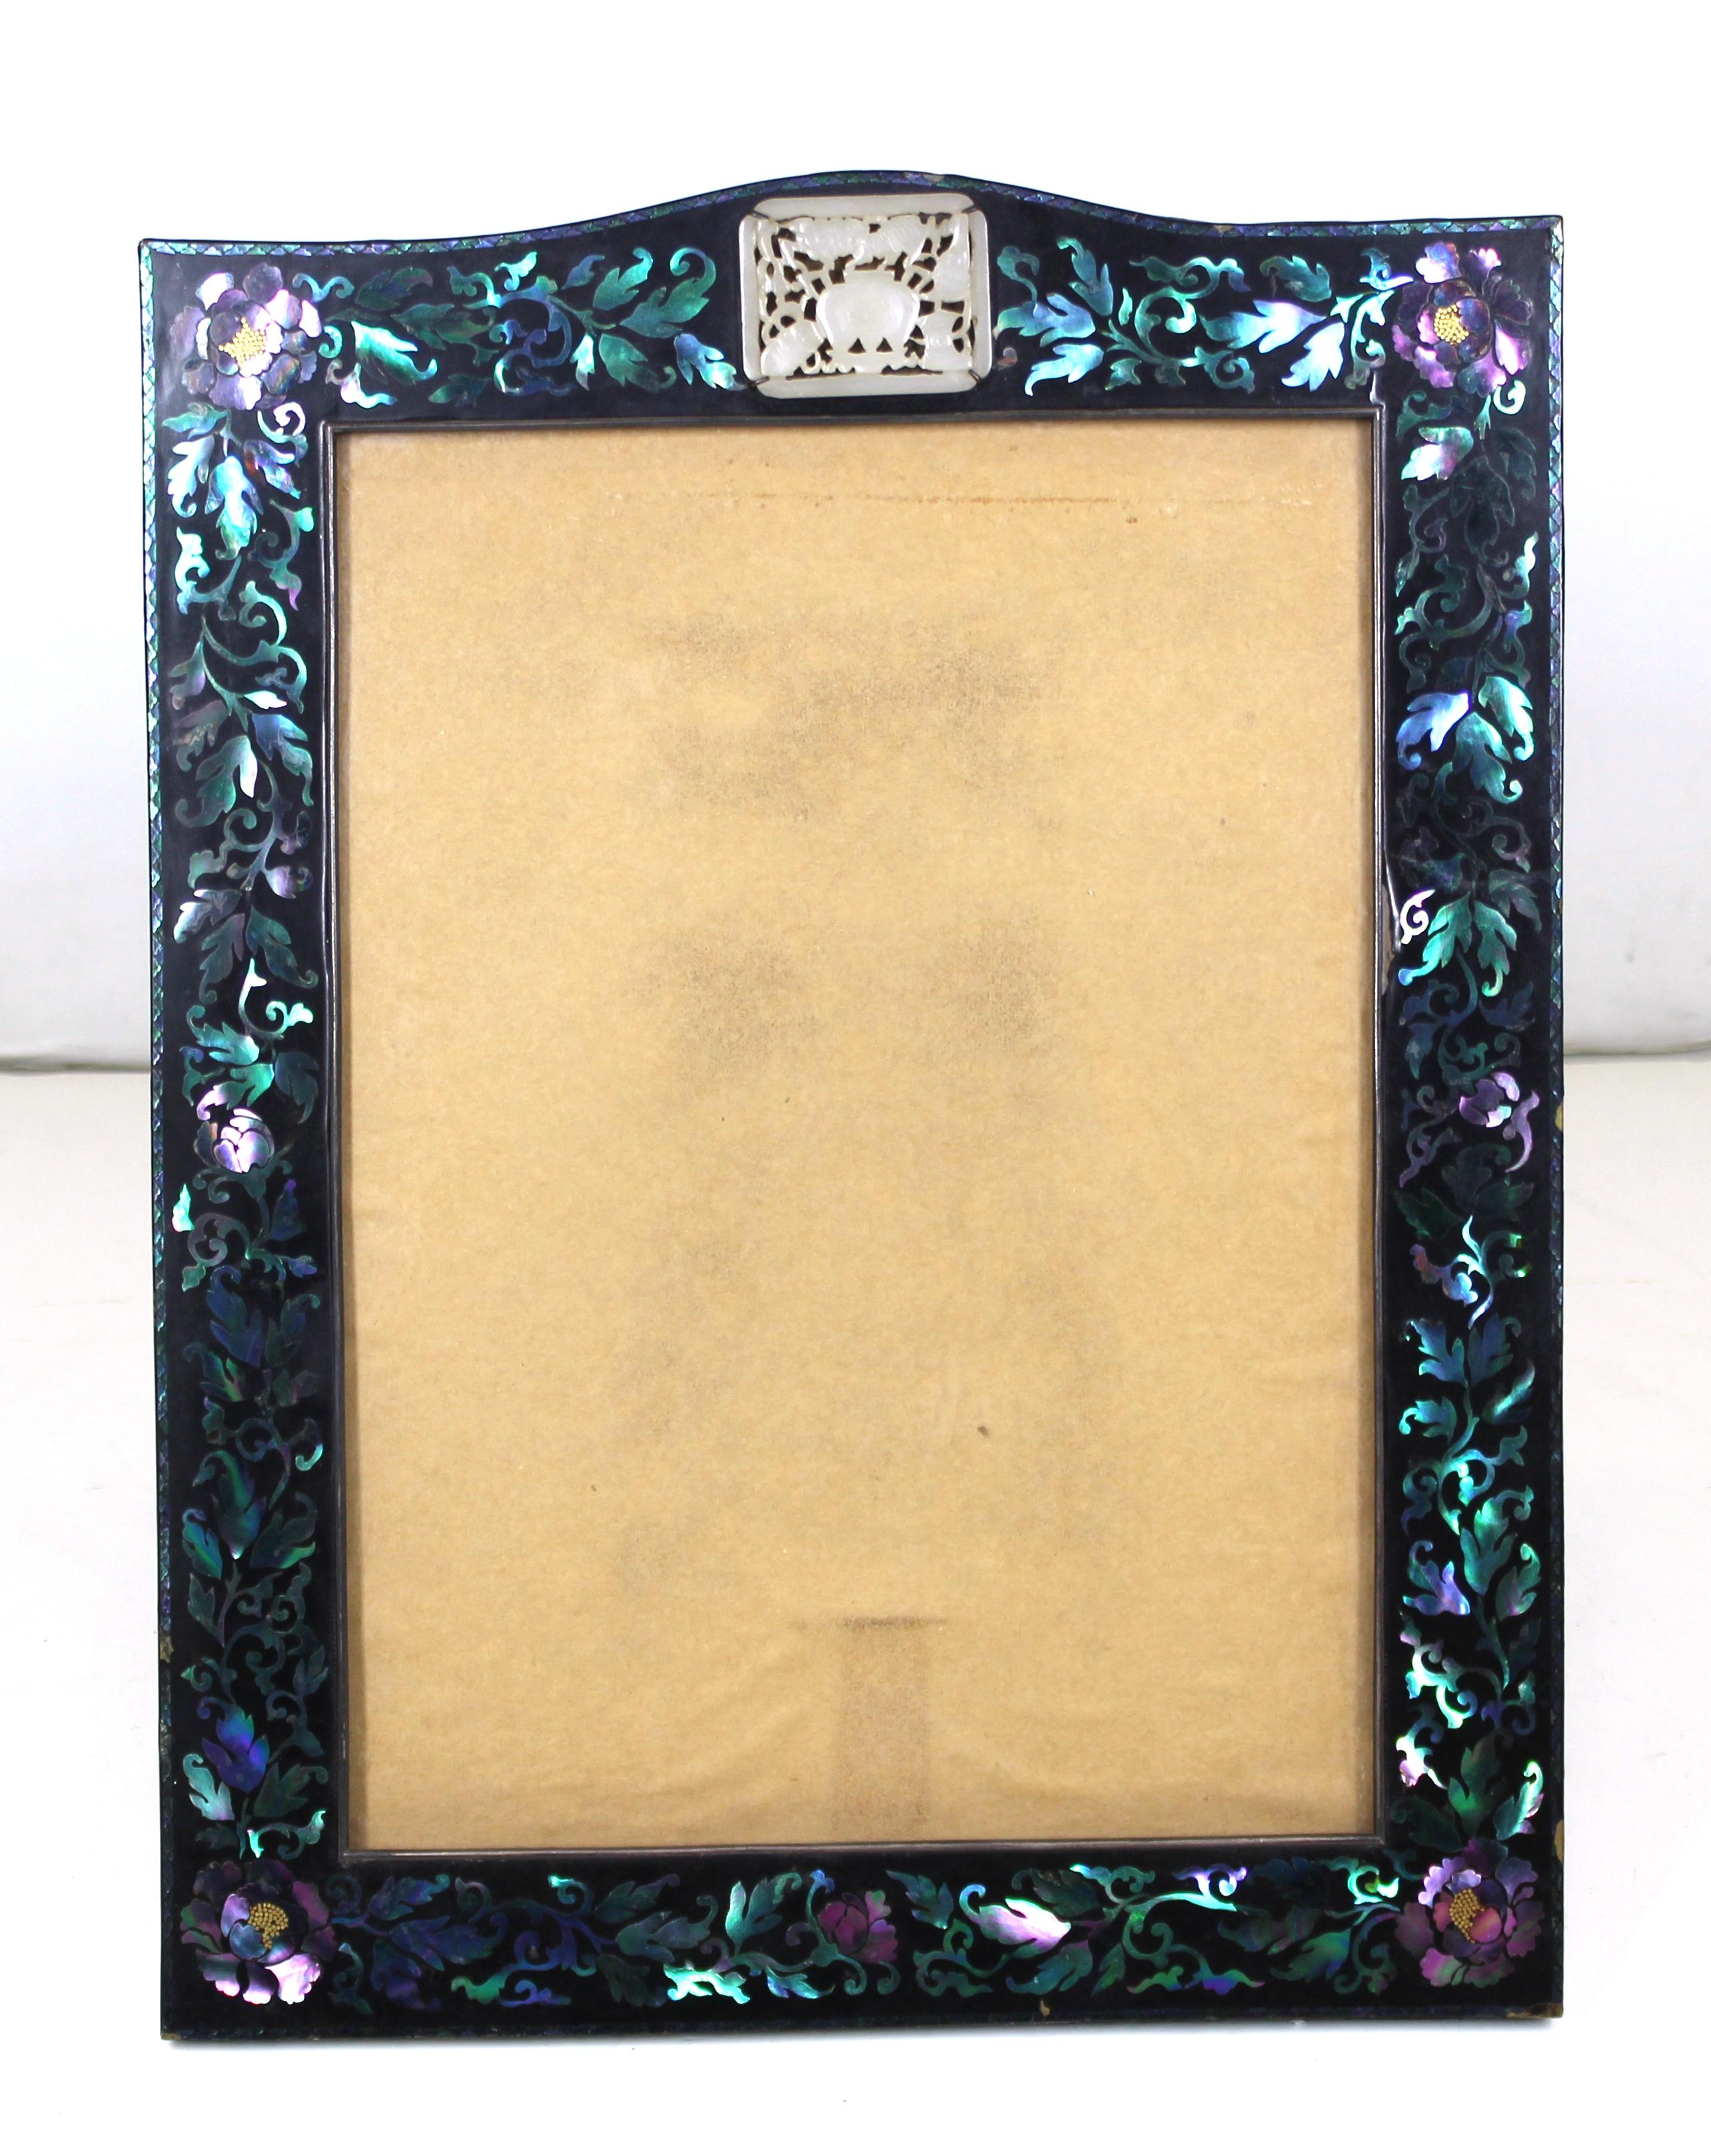 Chinese Export Lac Burgaute Inlaid Silver, Gold & Abalone Frame with Carved Jade For Sale 8